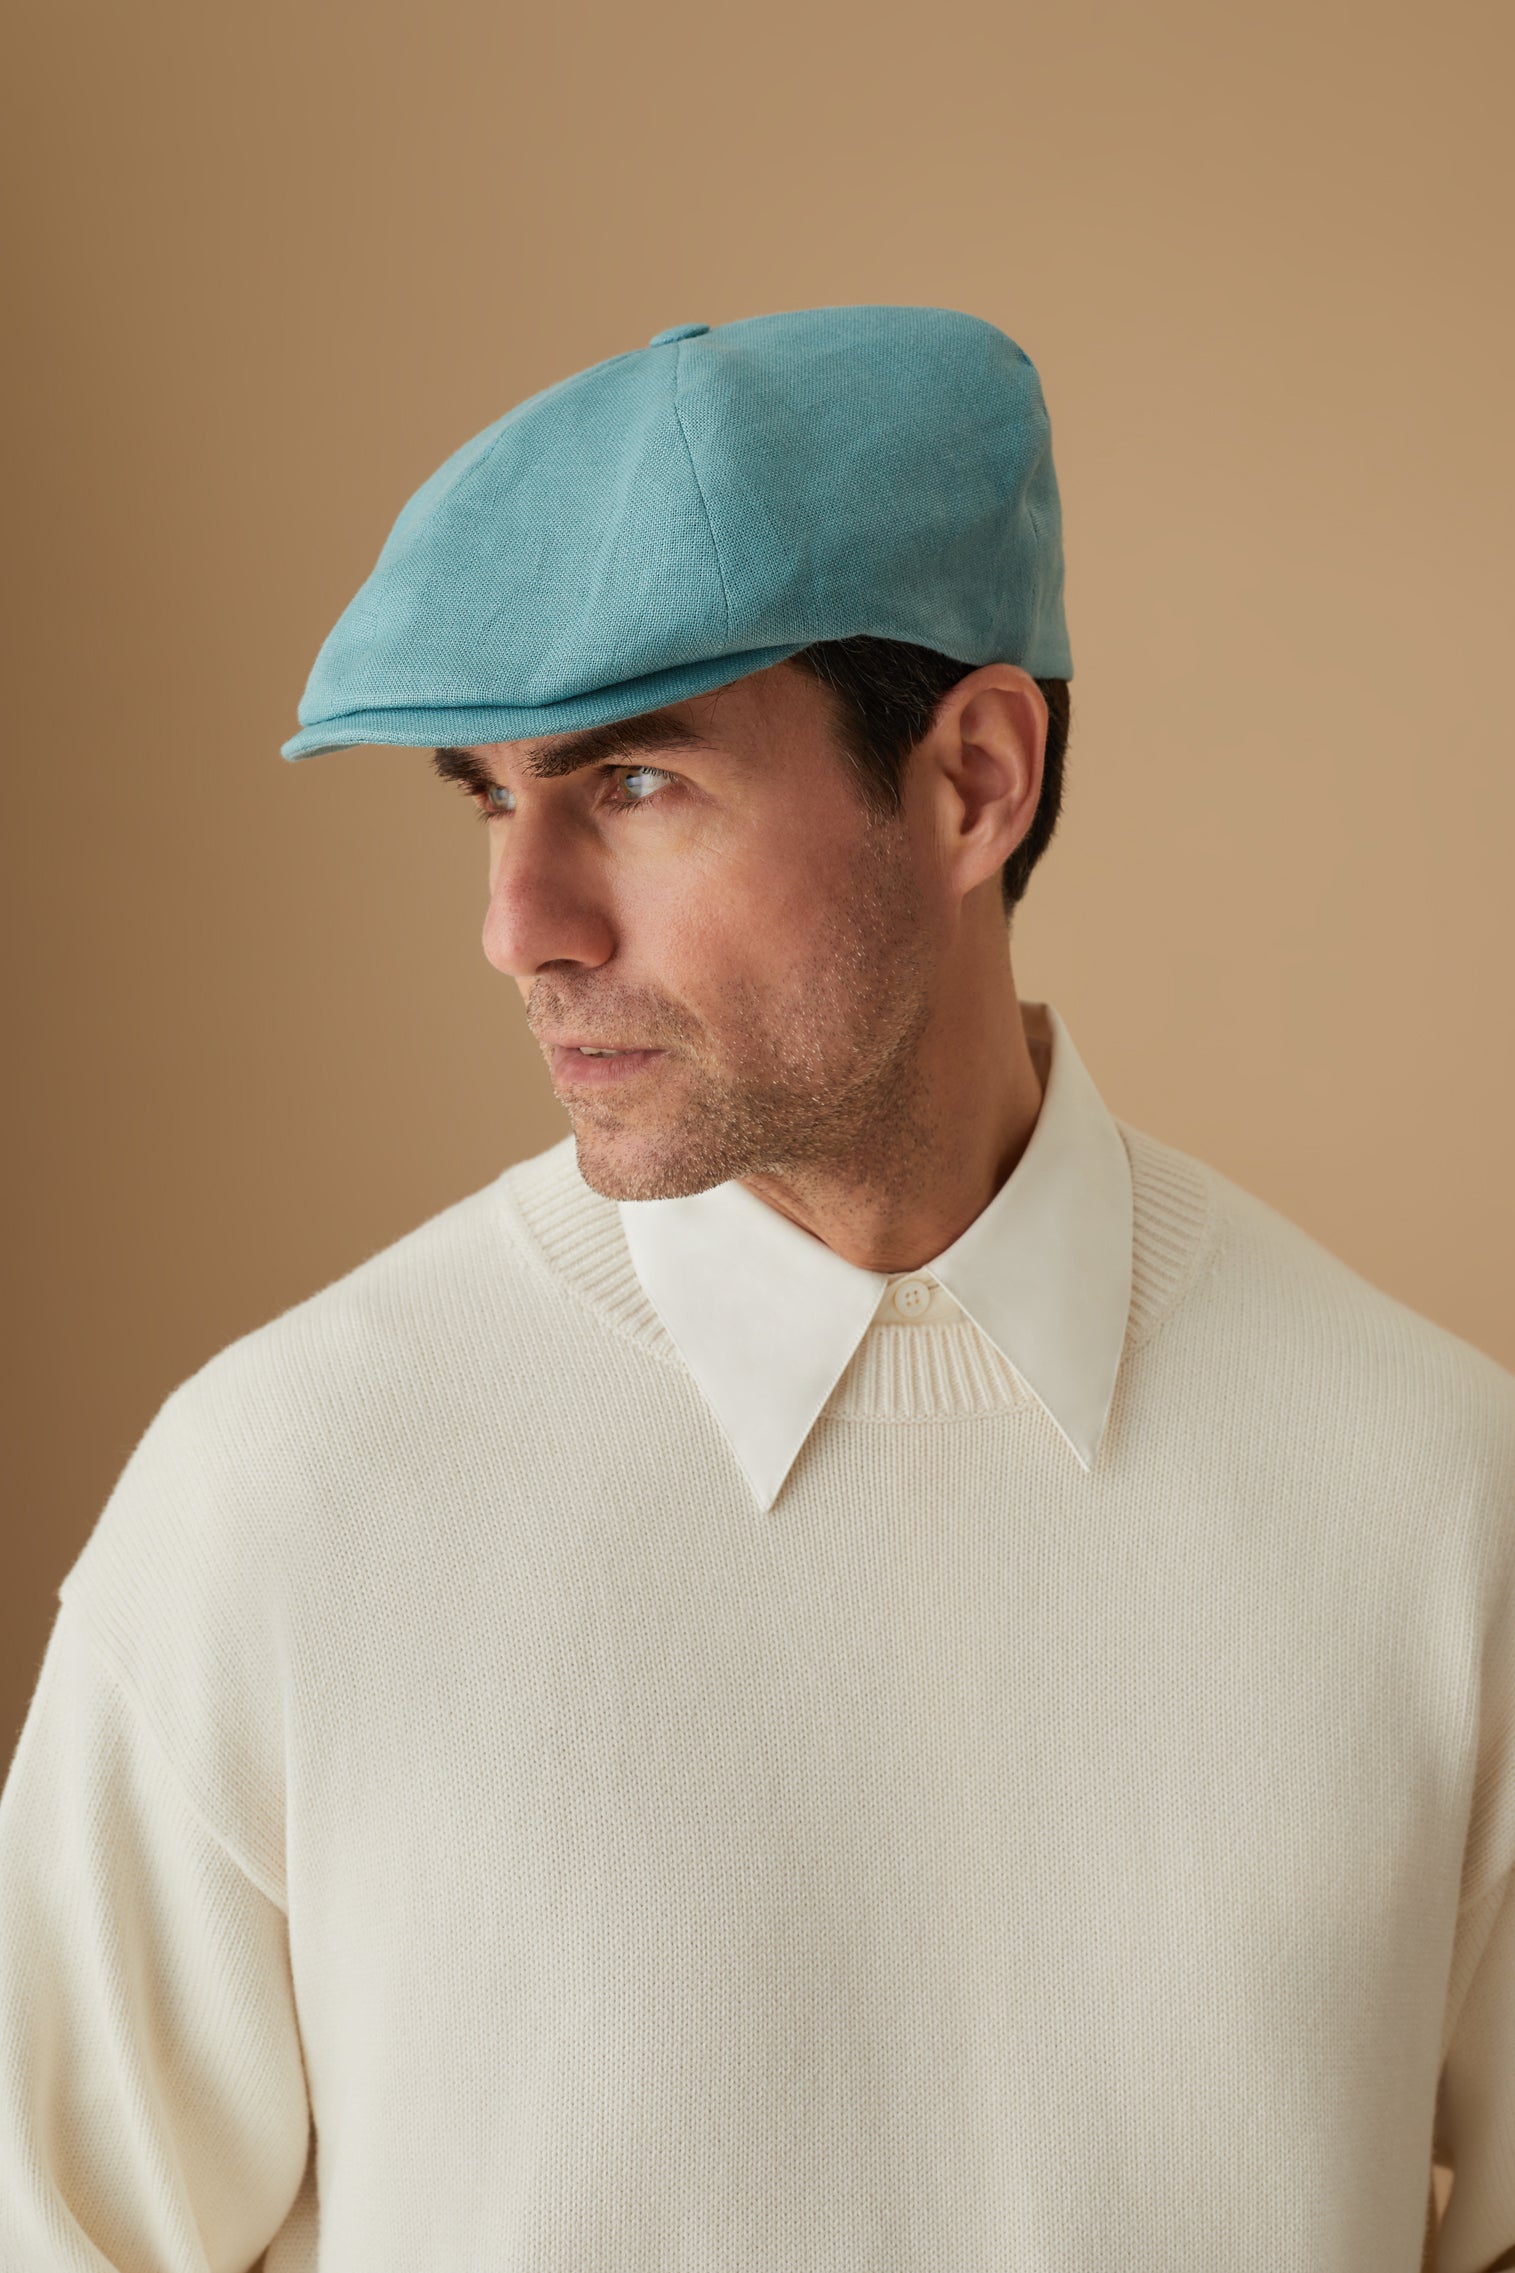 Tahoe Turquoise Bakerboy Cap - Hats for Tall People - Lock & Co. Hatters London UK